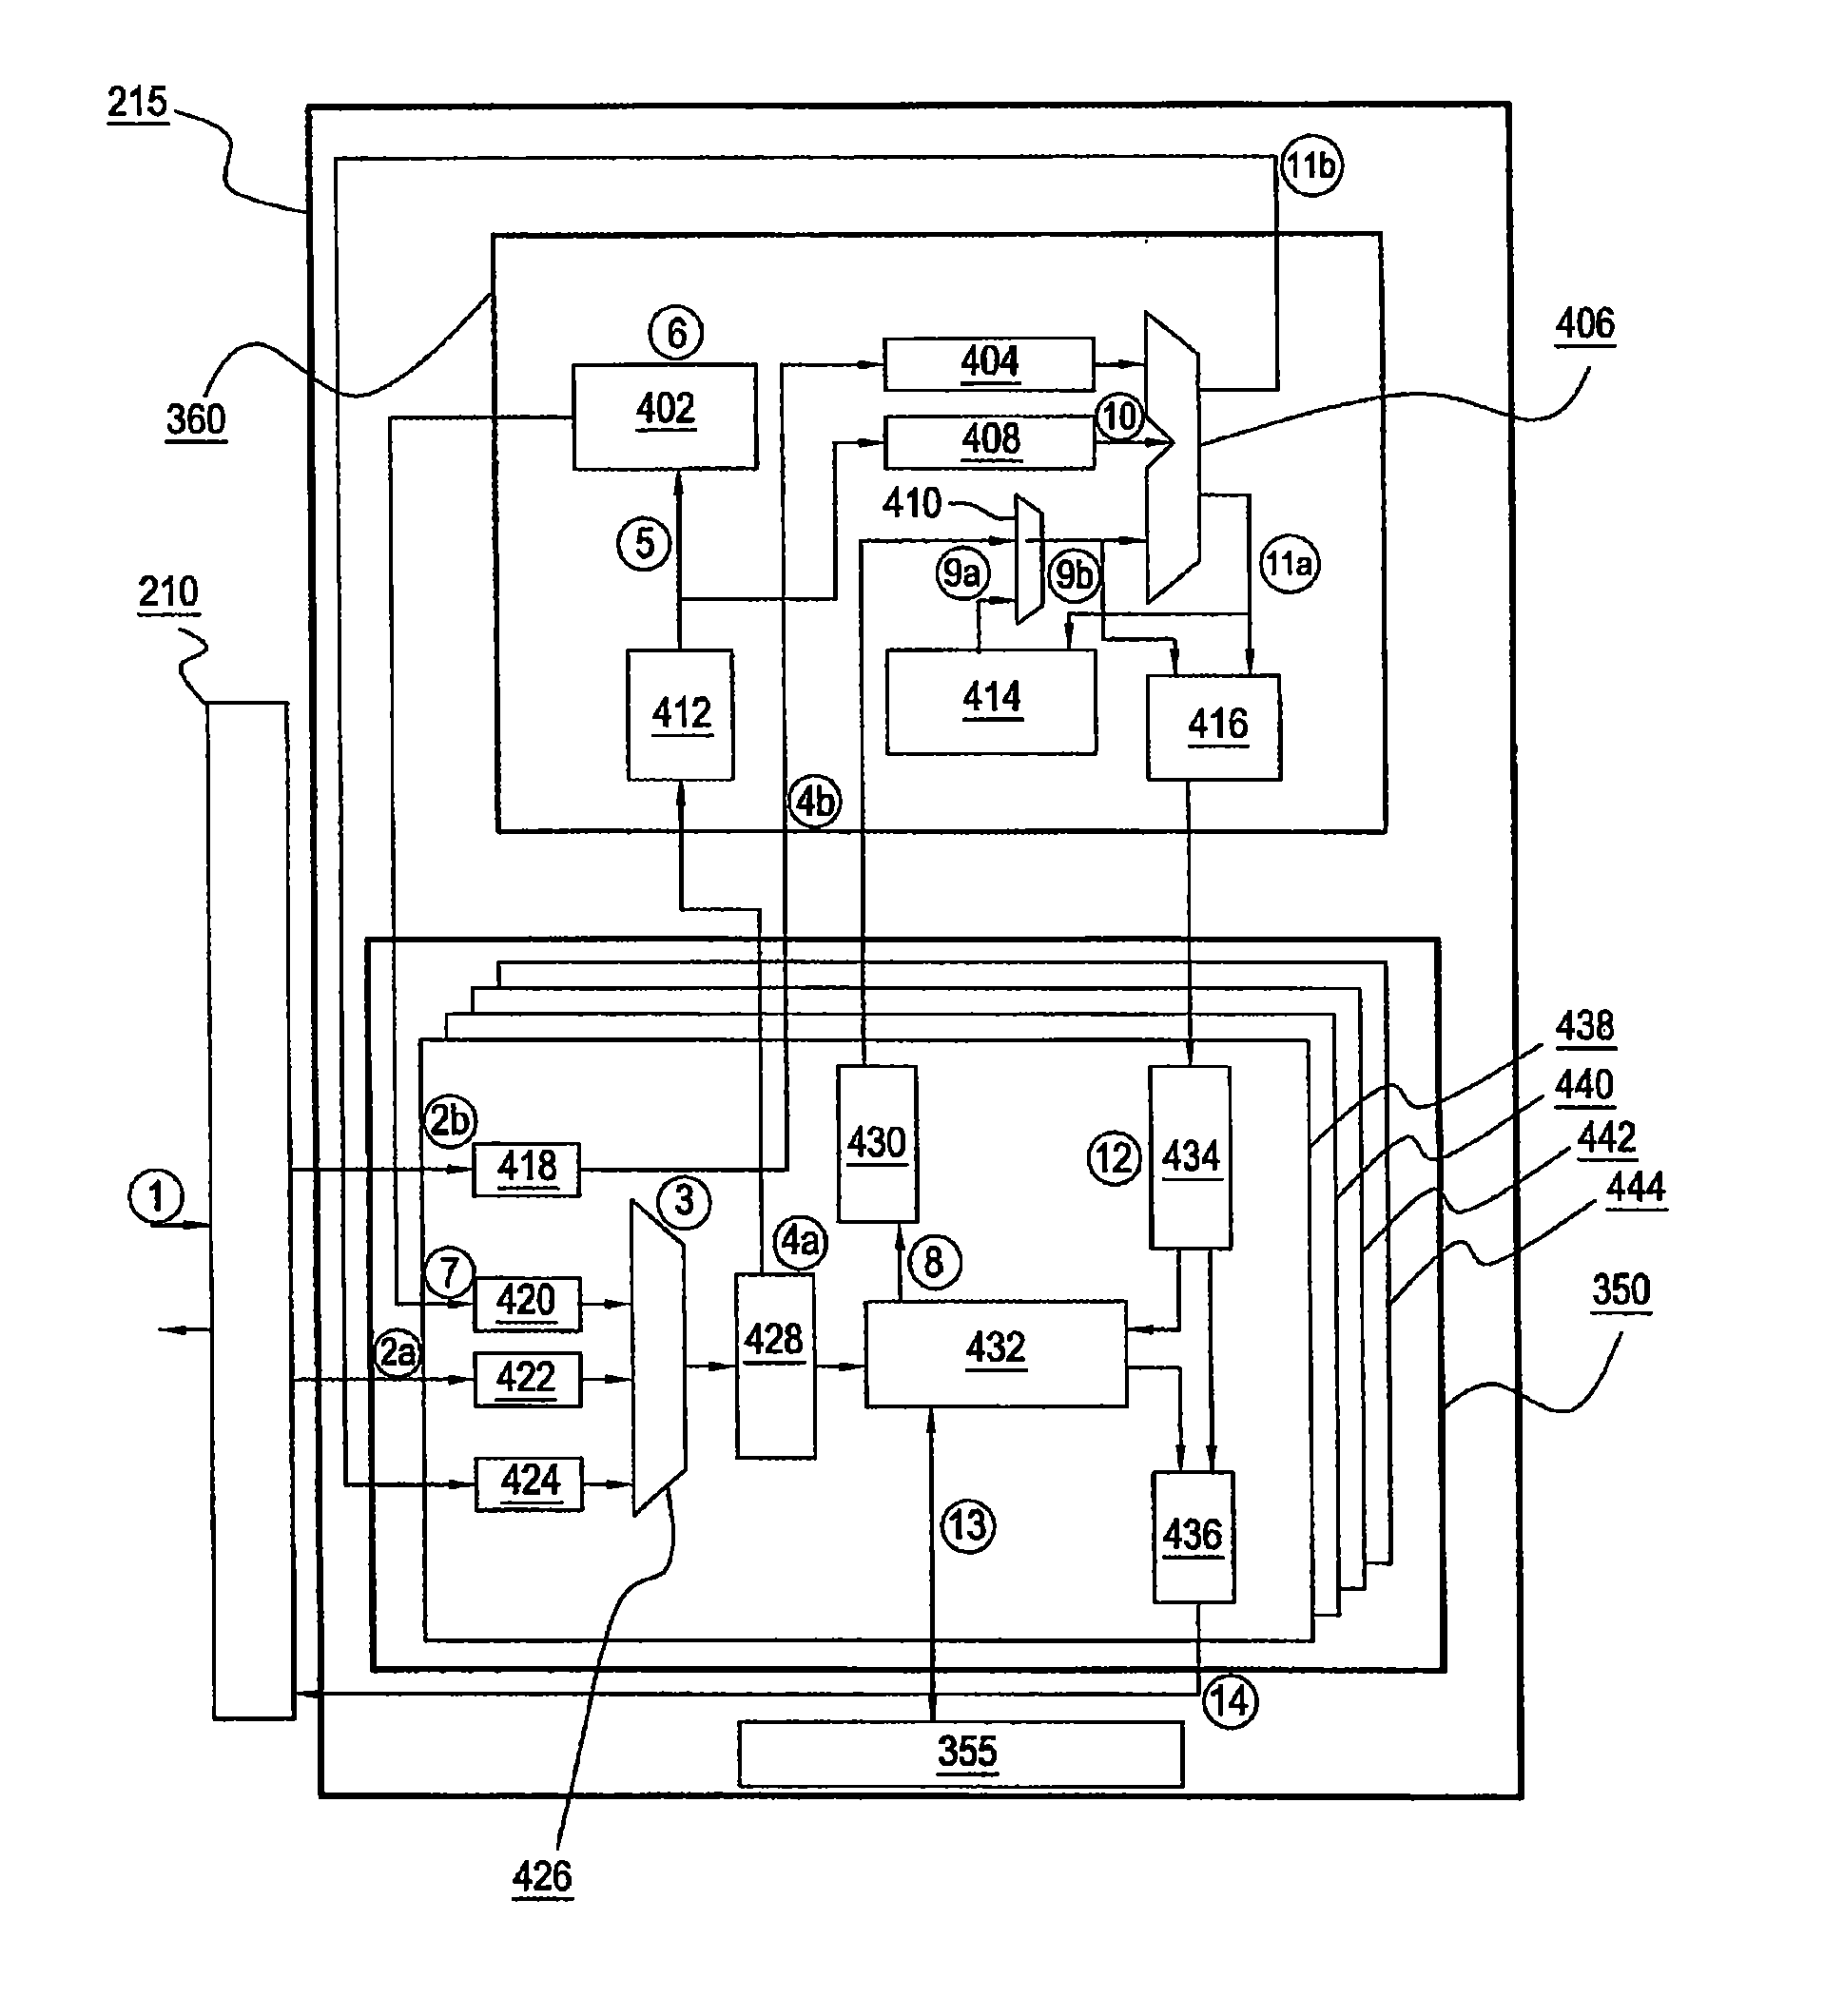 Cache-based control of atomic operations in conjunction with an external ALU block